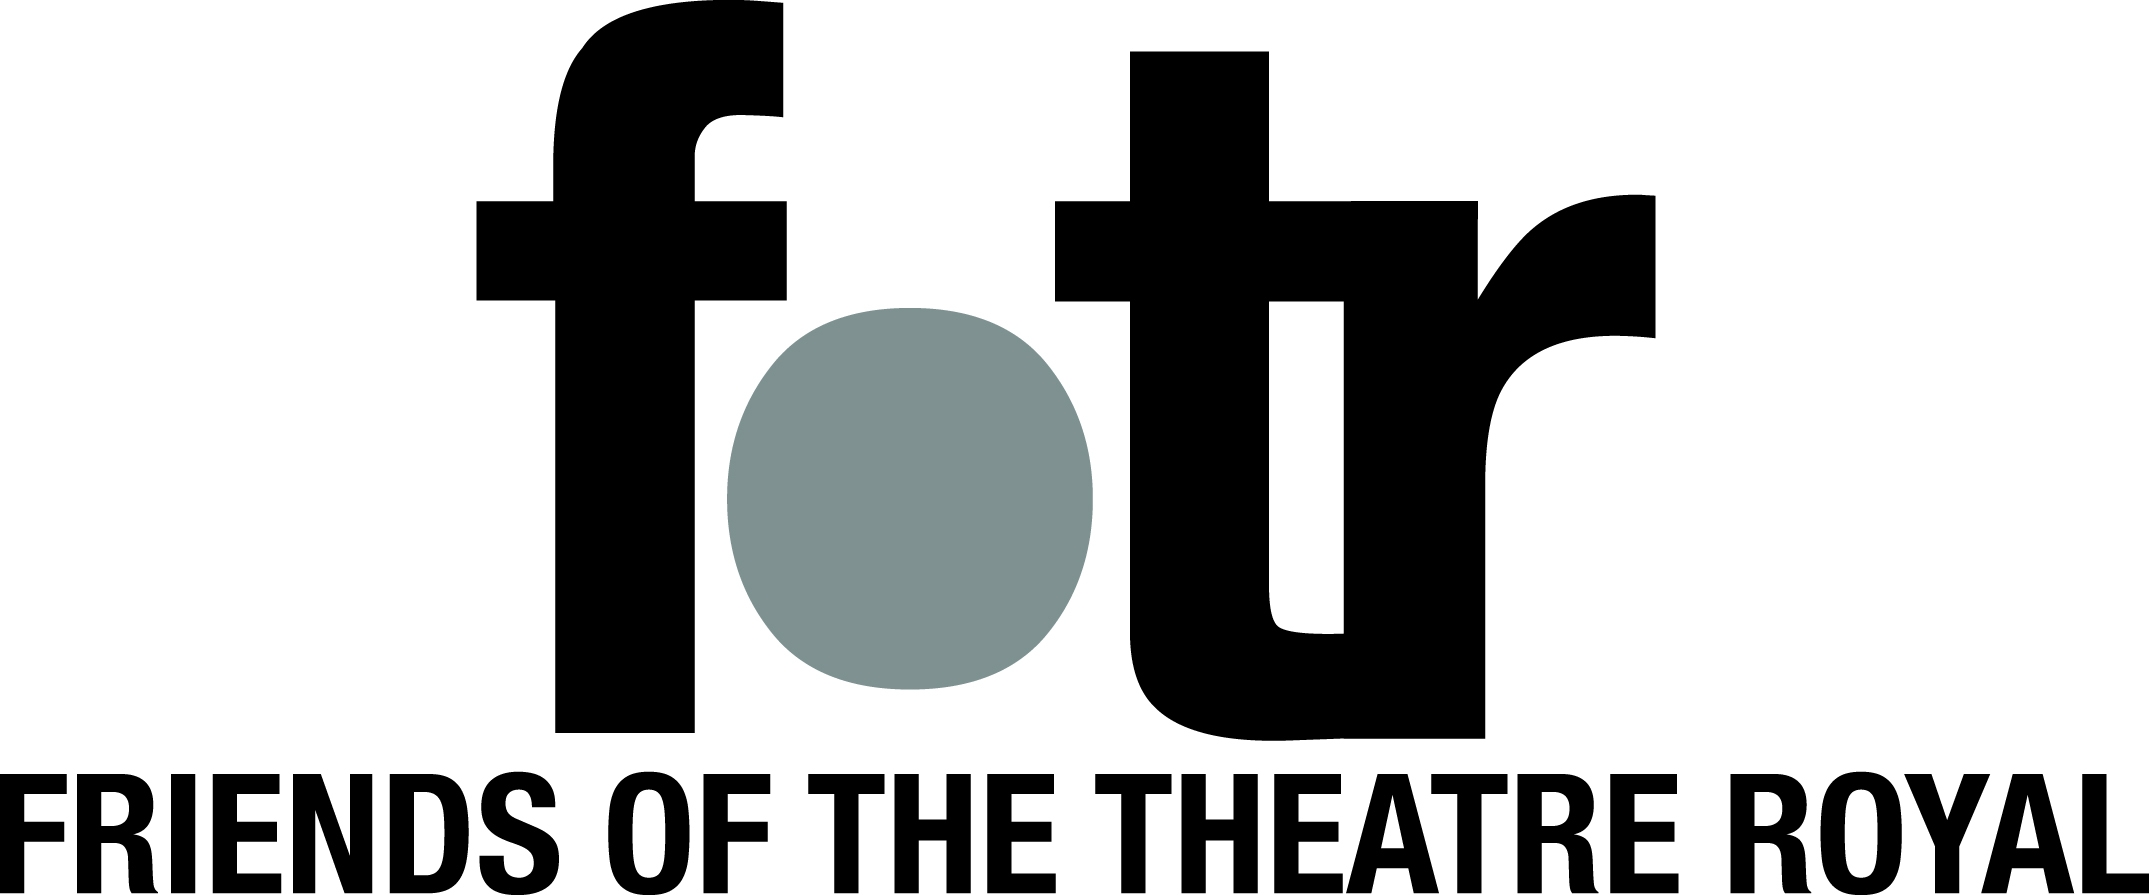 Friends of the Theatre Royal